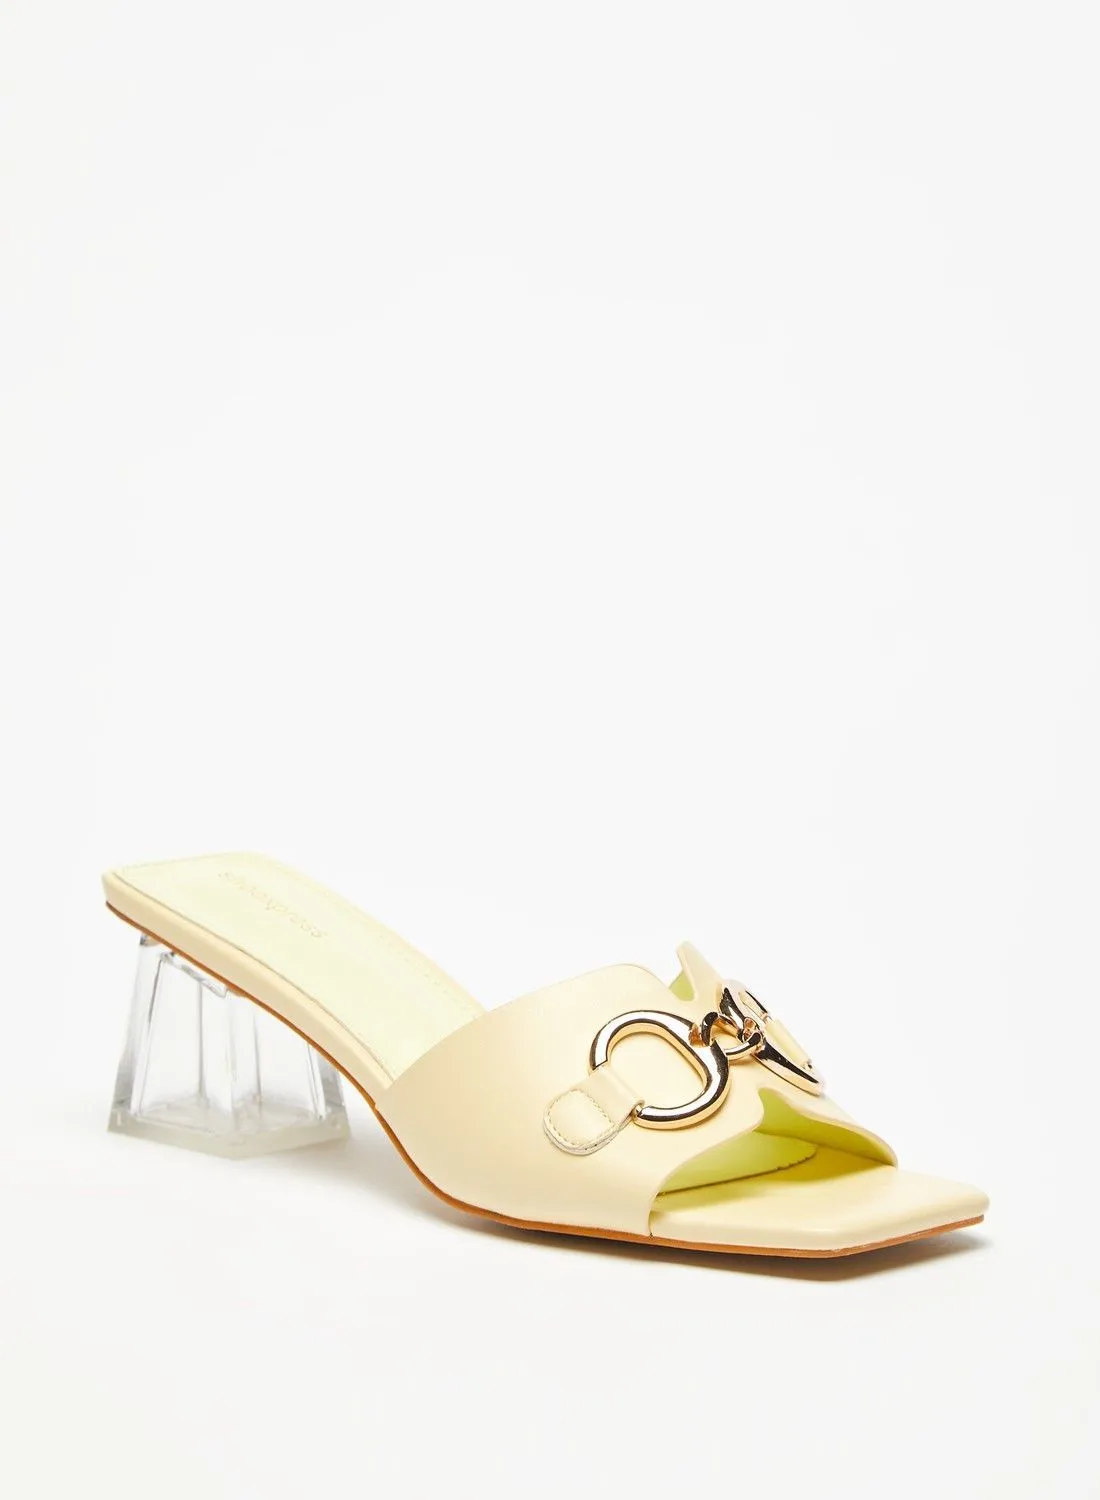 shoexpress Solid Slip-On Sandals with Metal Accent and Block Heels